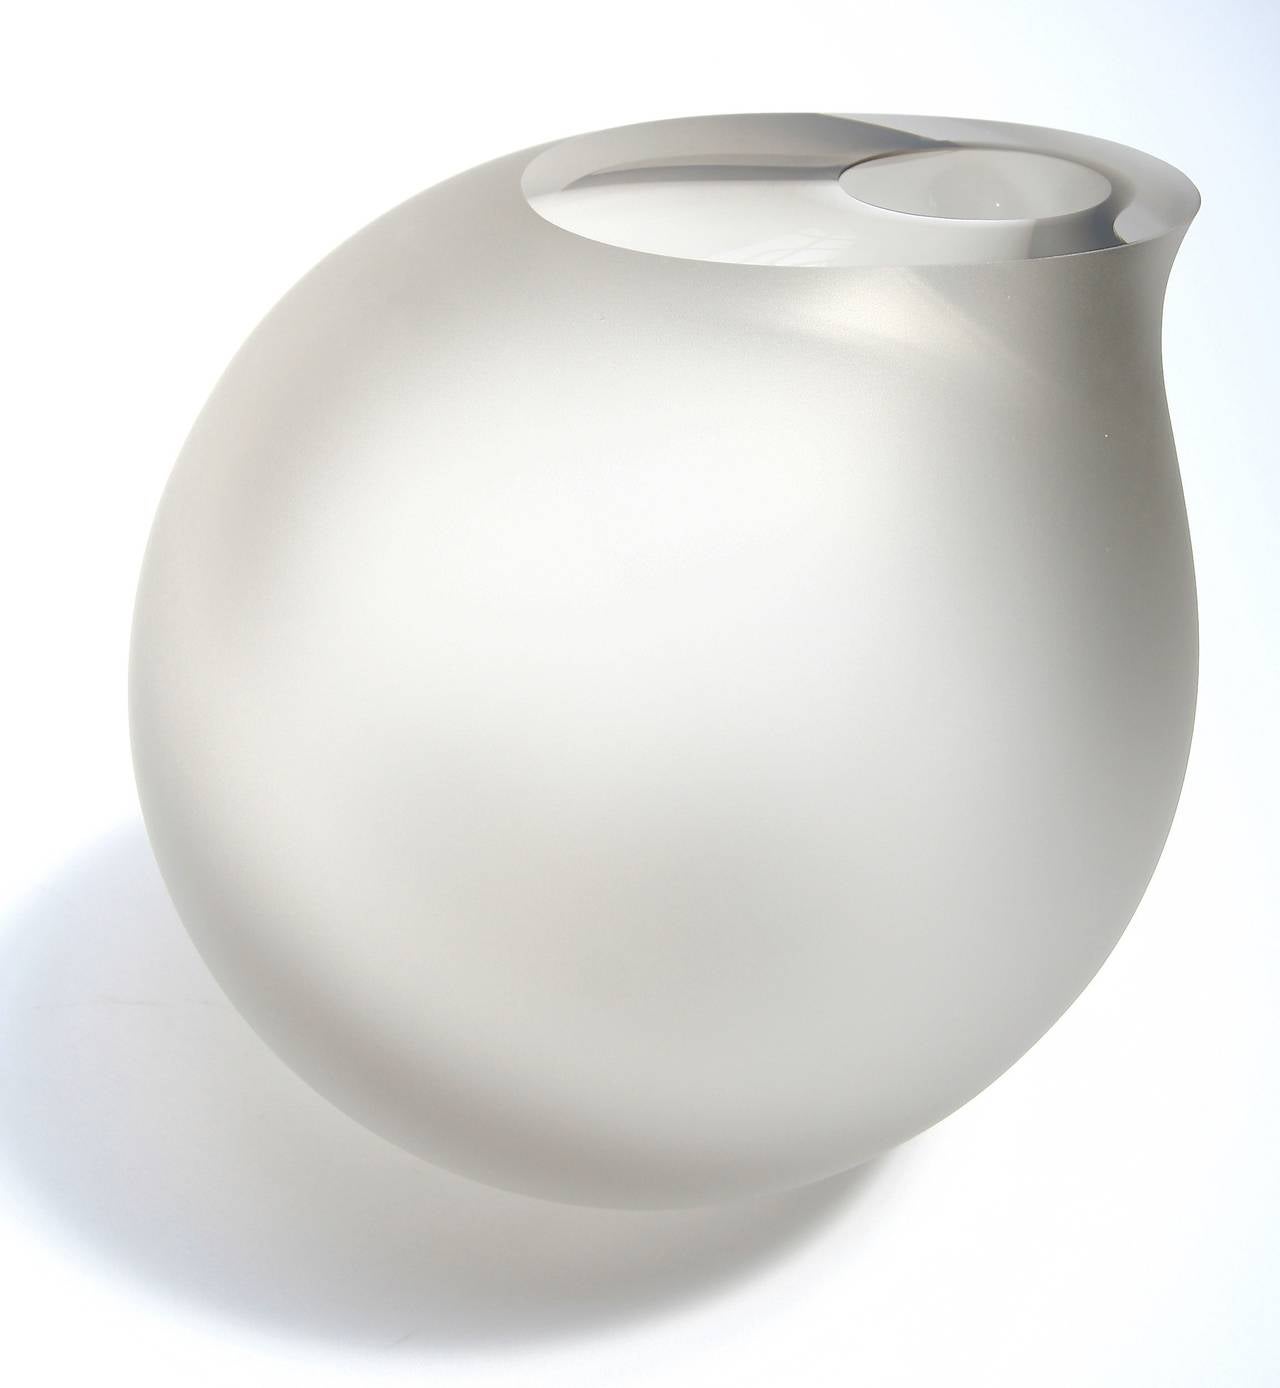 Anna Torfs medium Vaza glass vase or sculpture in smoke with sanded finish. Available in other colors and sizes. Only sanded finish available. Clear no longer available.